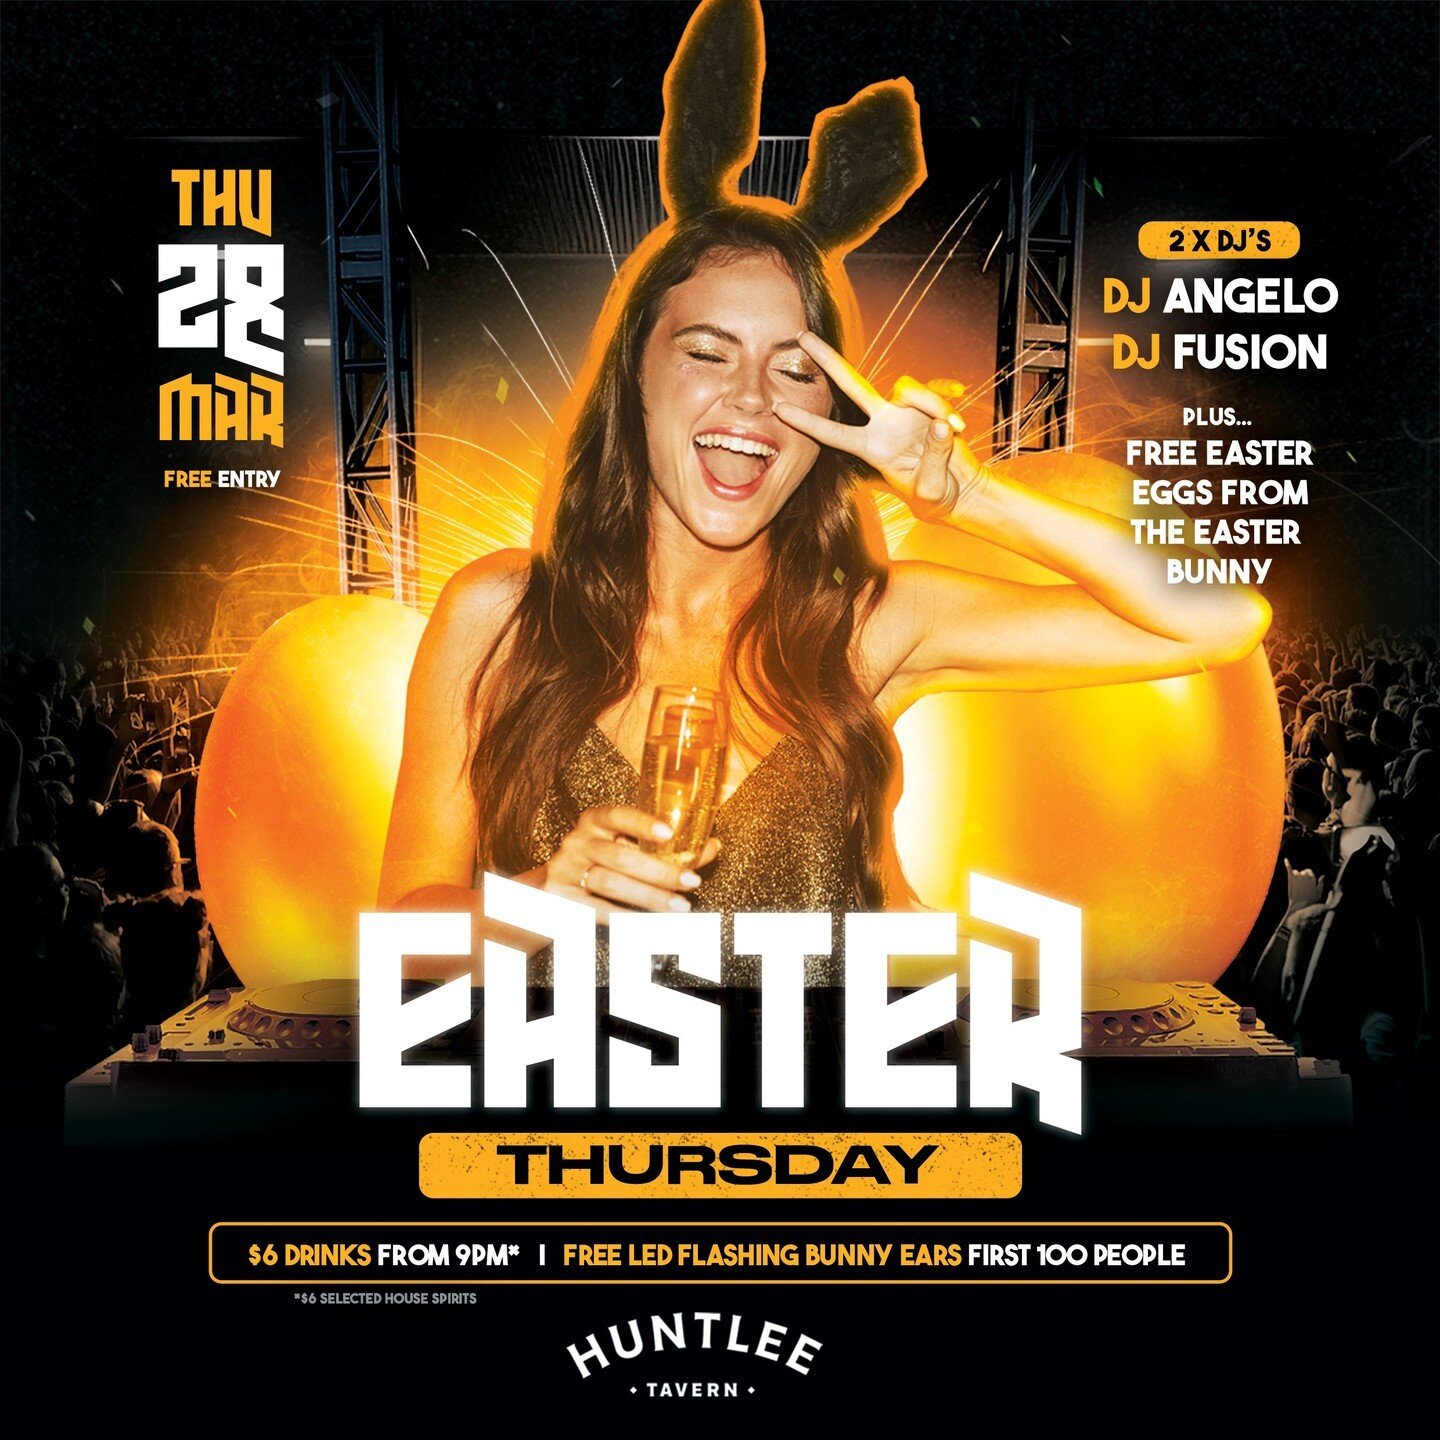 🐰🎉 Get ready to hop into Easter weekend at Huntlee Tavern! 🎉🐰
Join us this Tonight, for an egg-citing night of fun and festivities! 🥳
🌟 FREE ENTRY from 9 PM onwards!
🥃 $6 SPIRITS from 9 PM!
🎧 Groove to the beats of DJ Angelo and DJ Fusion til